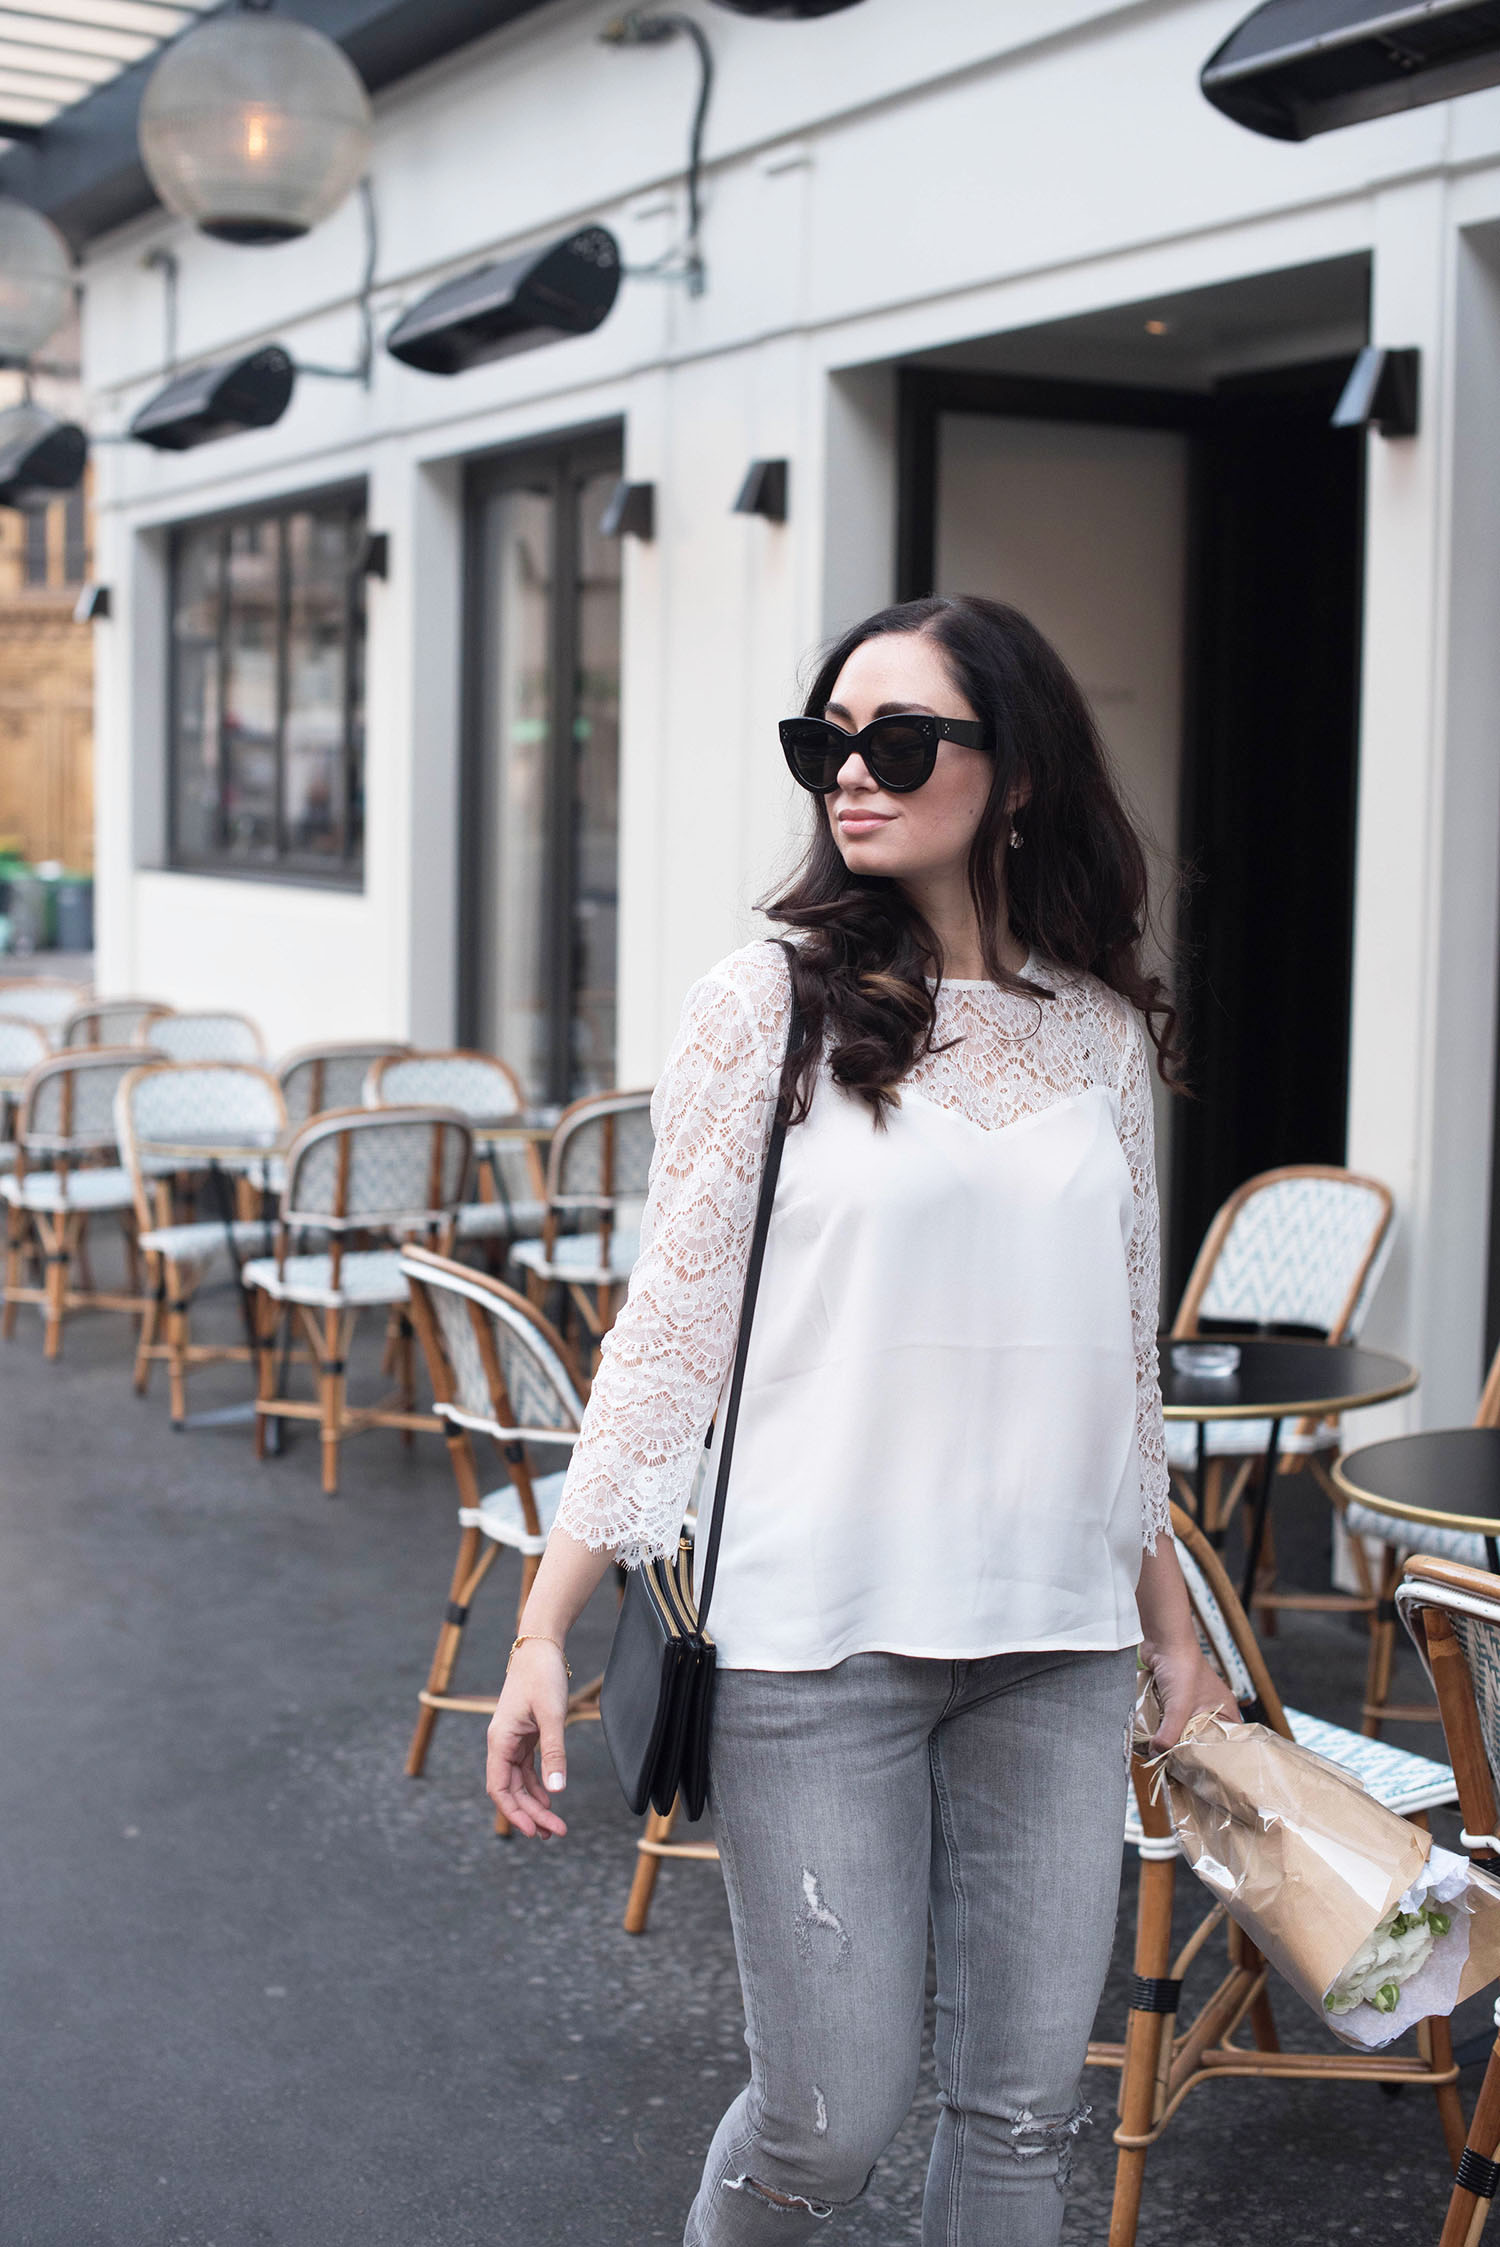 Style blogger Cee Fardoe of Coco & Vera walks past Maison Marie in Paris wearing Celine Audrey sunglasses and grey jeans